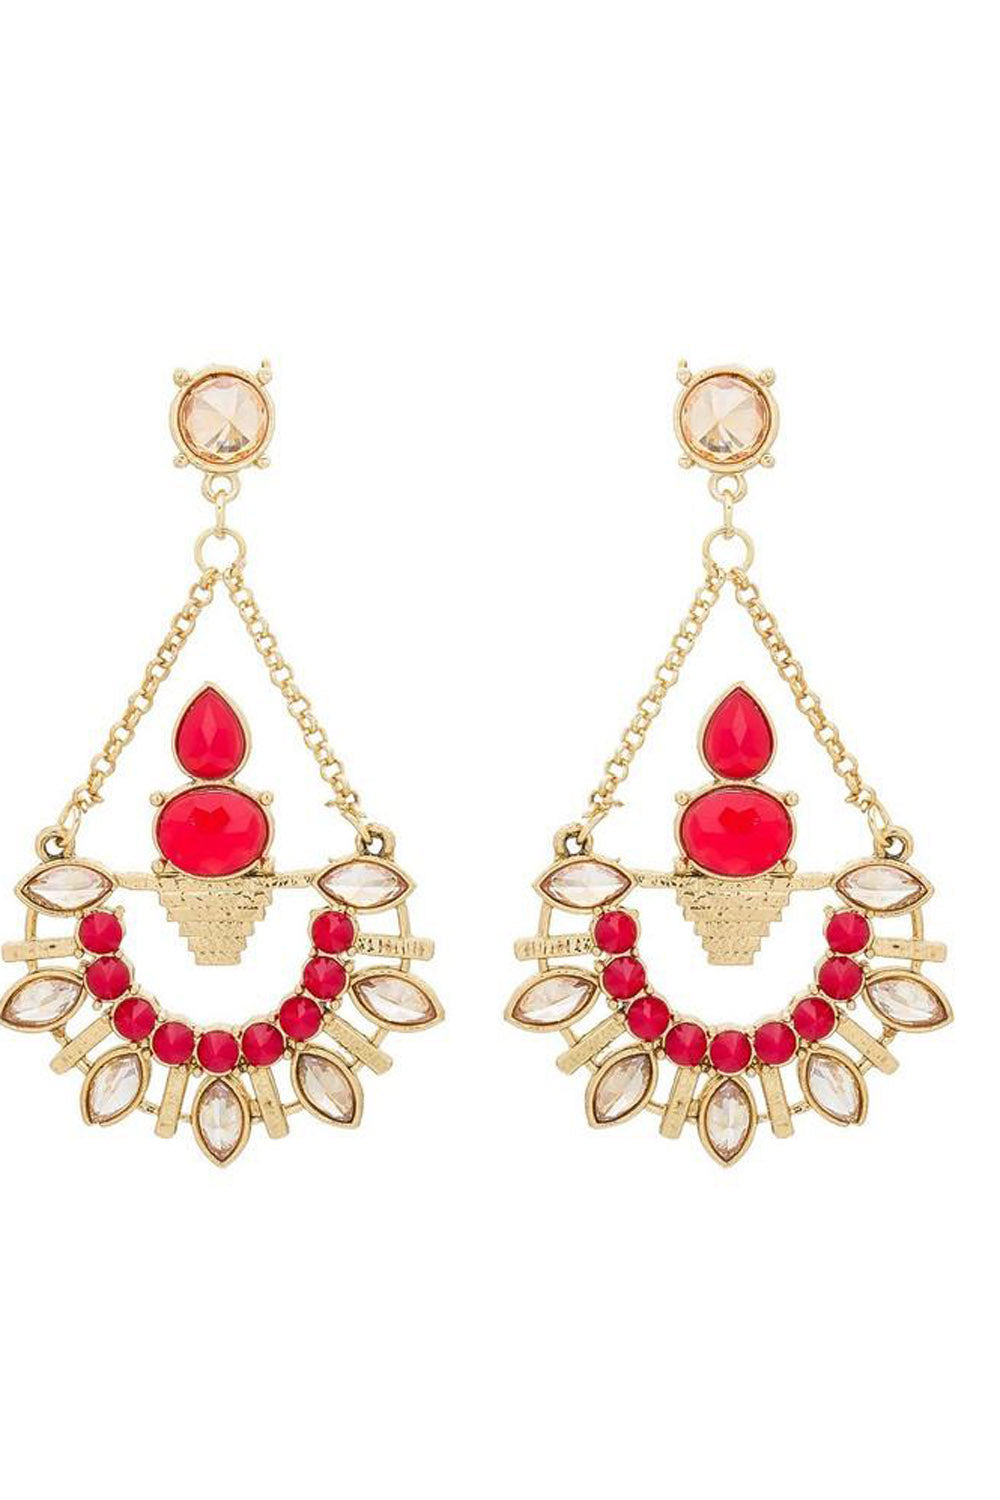 Buy Women's Alloys Earring in Red and Gold Online